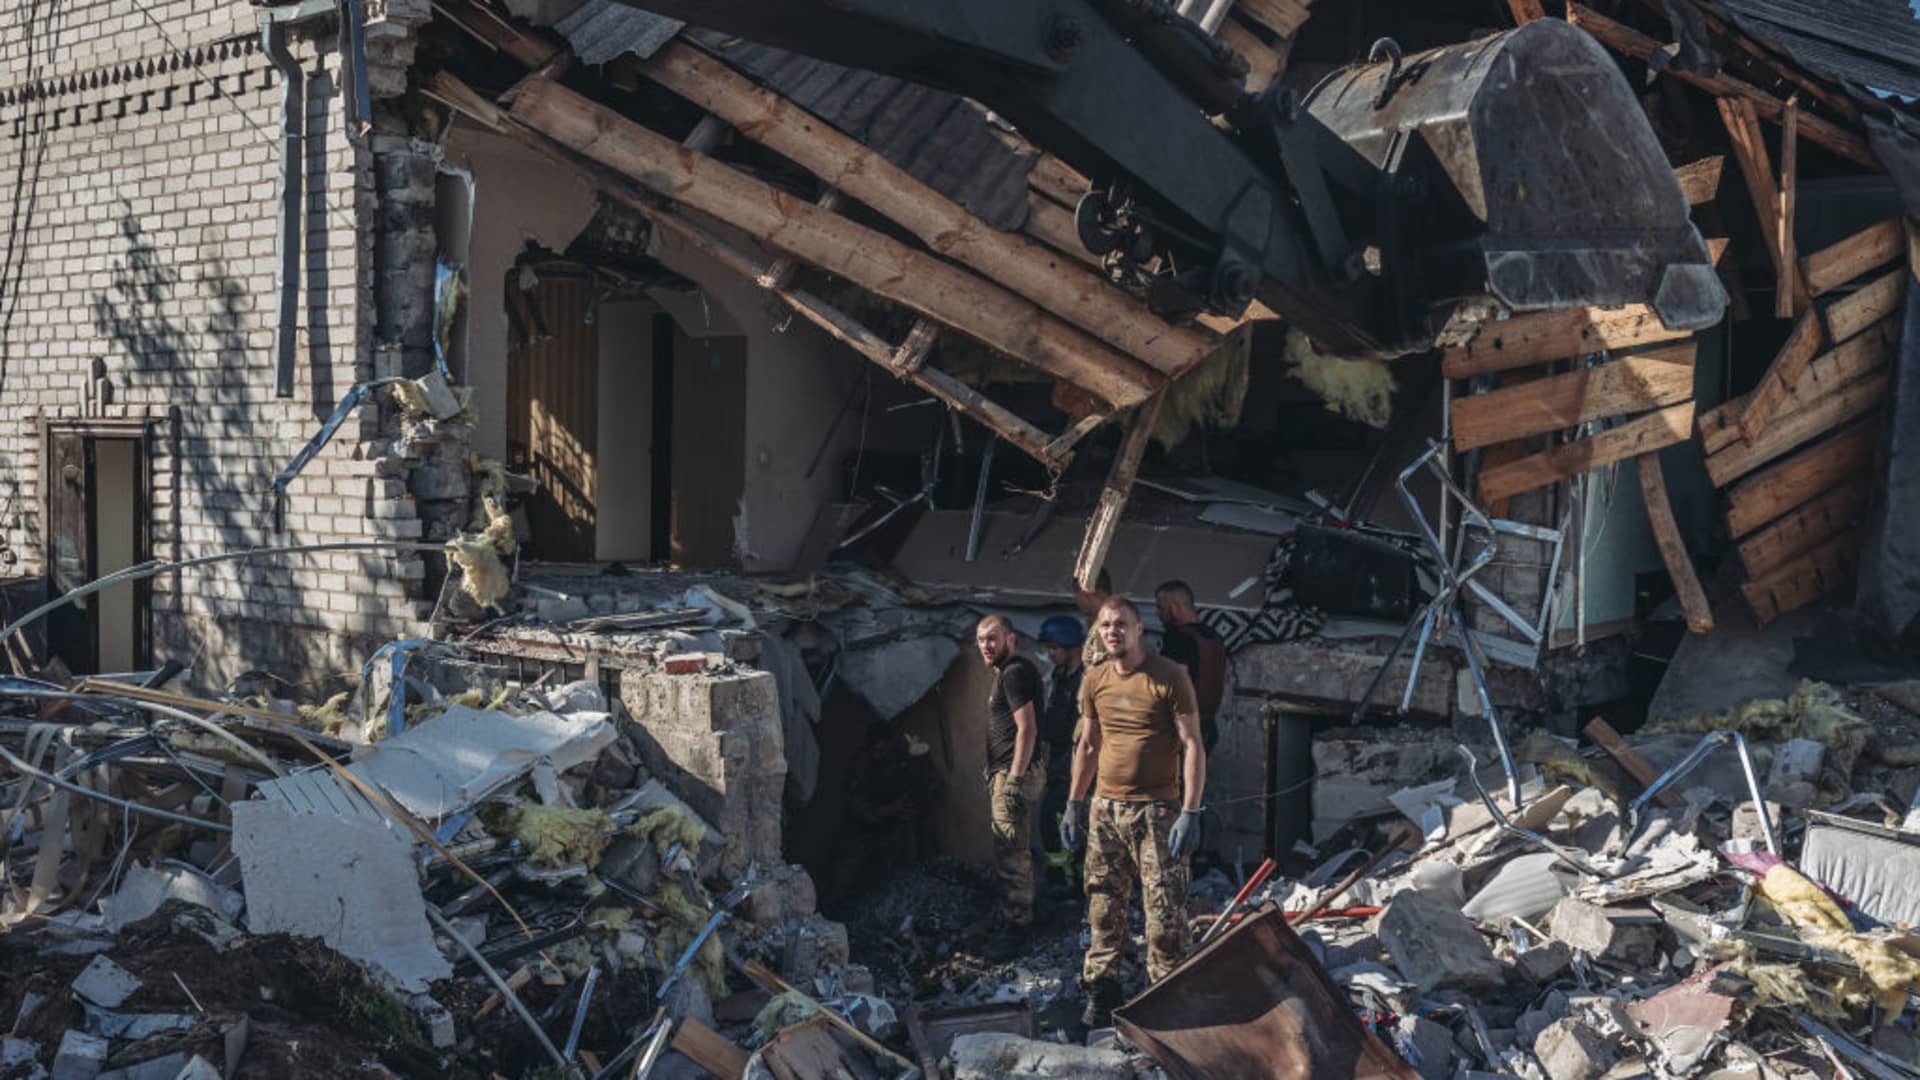 Ukrainian emergency service workers and military personnel try to get bodies out of a house that was shelled in Sloviansk, Ukraine, on July 19, 2022.